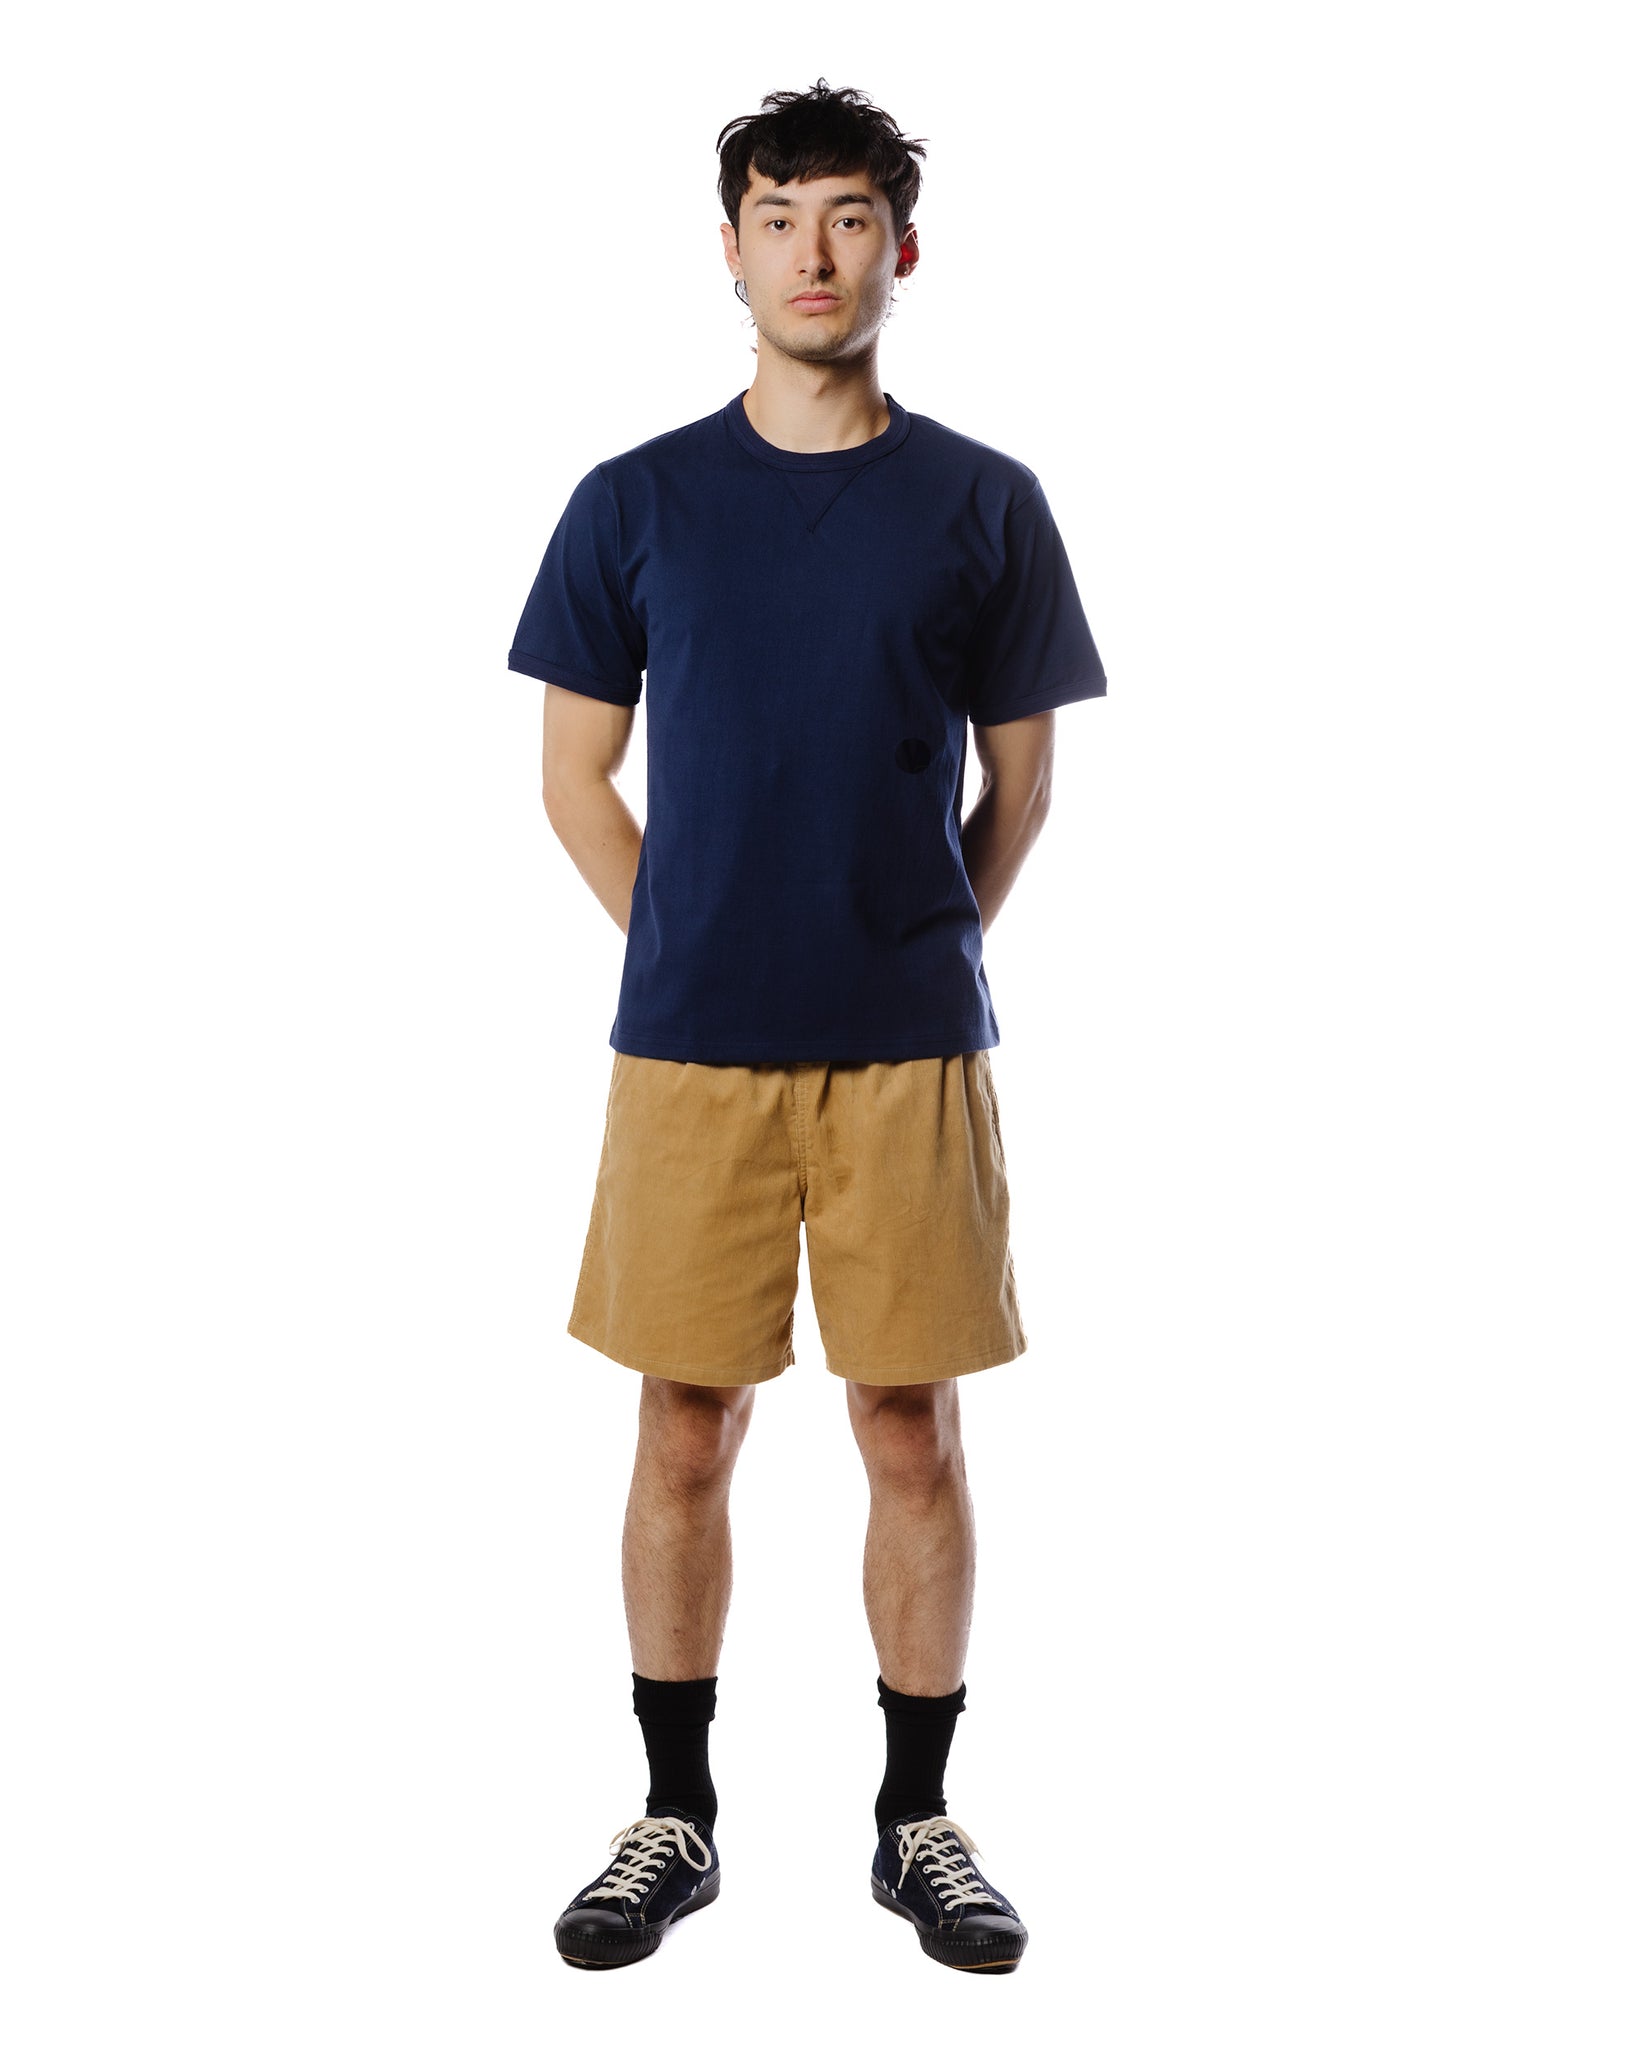 The Real McCoy's MC23020 Gusset Tee Navy Model